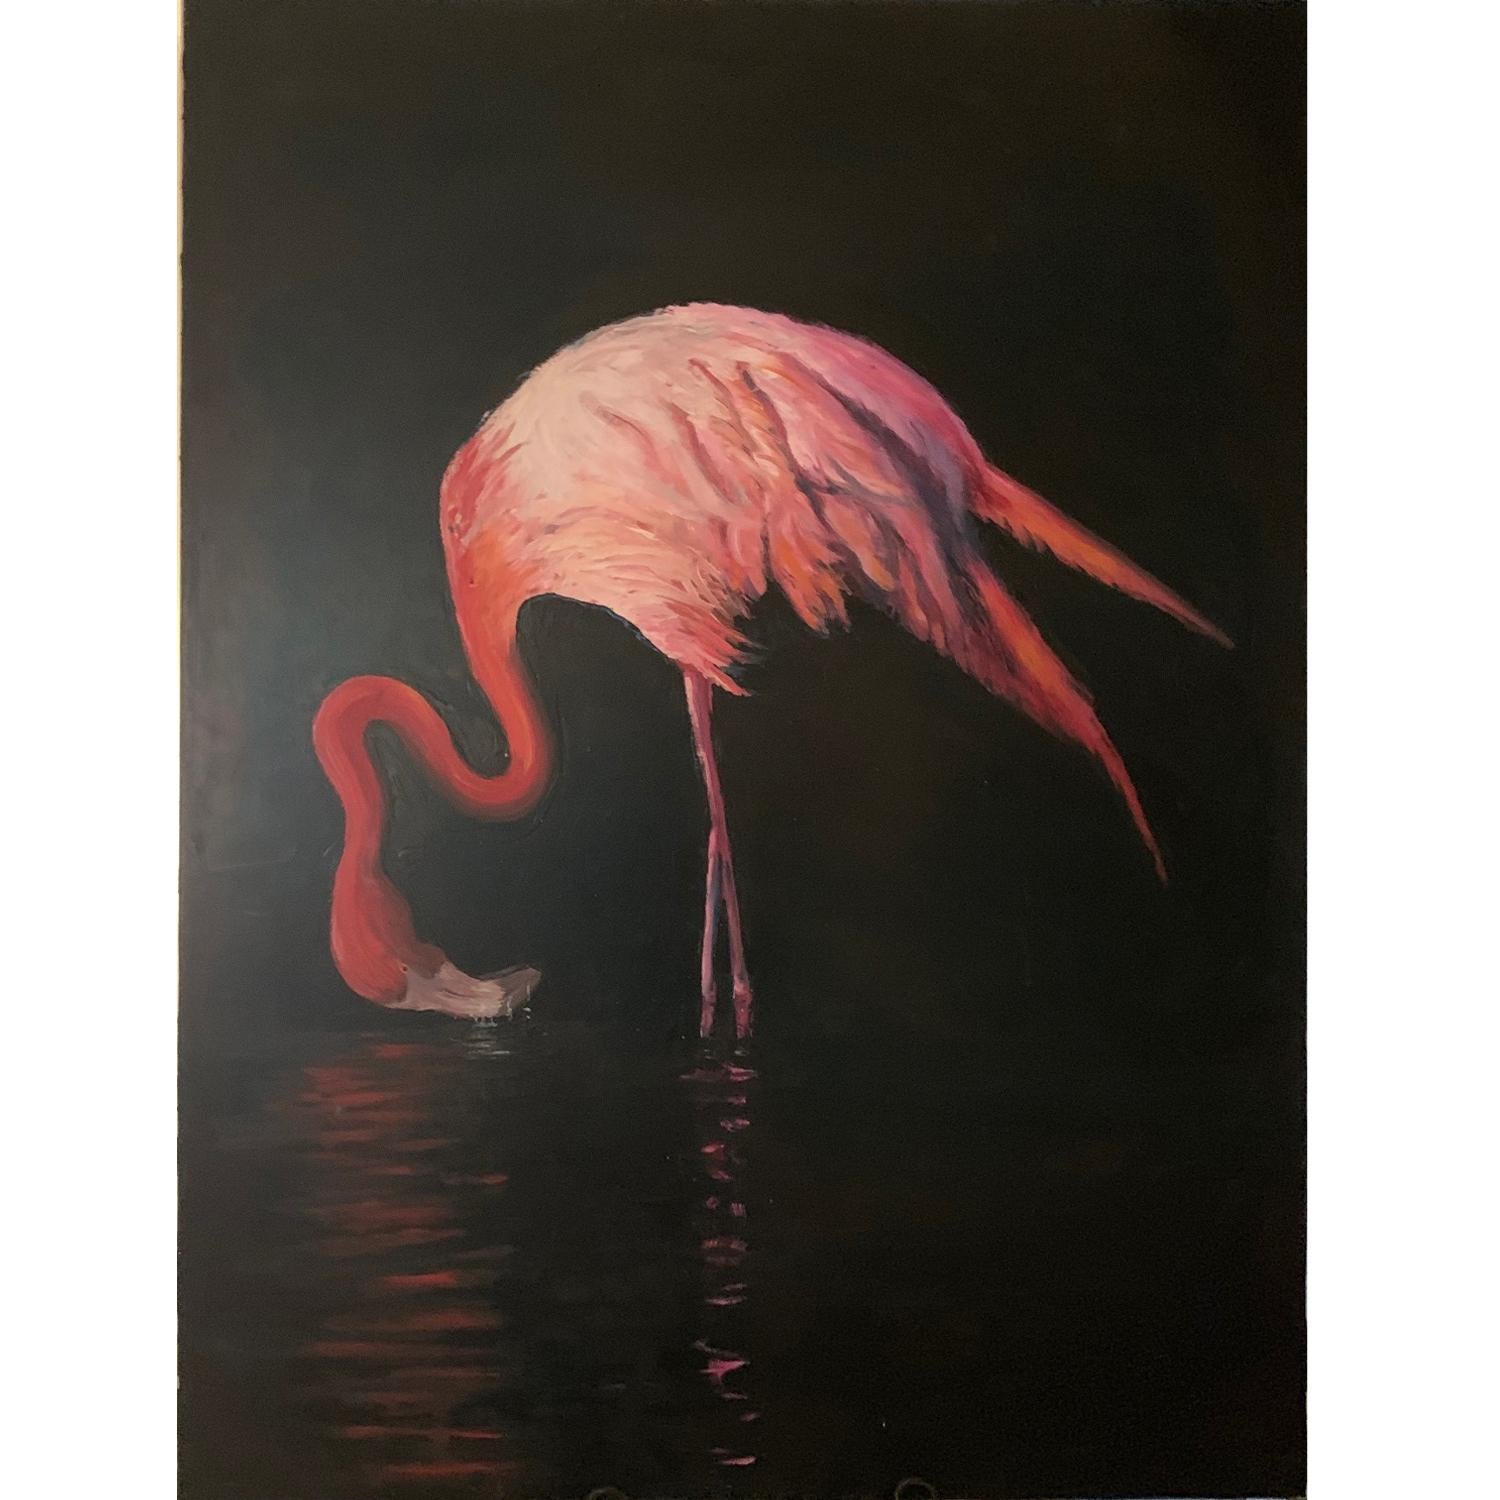 Mike Ball Landscape Painting - "Pink Flamengo" oil on canvas